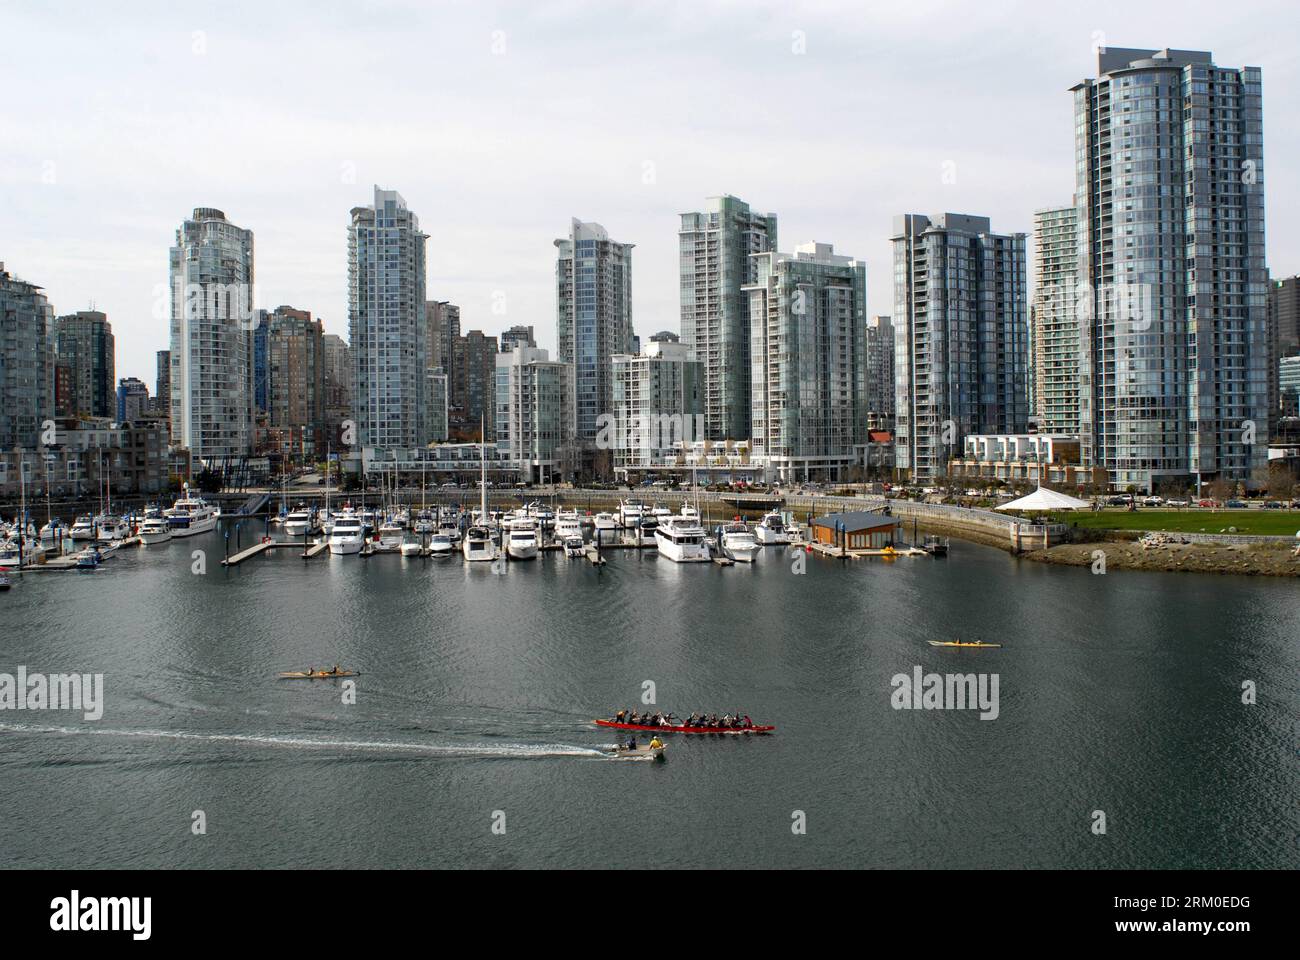 Bildnummer: 59392542  Datum: 20.03.2013  Copyright: imago/Xinhua (130320) -- VANCOUVER, March 20, 2013 (Xinhua) -- Photo taken on March 20, 2013 shows the view of Vancouver s Yaletown in Canada. The City of Vancouver stood out of 66 cities and was awarded  GlobalEarthHour Capital 2013 by the WorldWildlifeFund (WWF) on Tuesday for its efforts to address climate change. (Xinhua/Sergei Bachlakov) CANADA-VANCOUVER-WWF-ENVIRONMENT PUBLICATIONxNOTxINxCHN Gesellschaft Preis Ehrung Stadtehrung Architektur Stadtplanung Gebäude Totale Kanada x2x xdd premiumd 2013 quer o0 Skyline Hochhäuser     59392542 Stock Photo